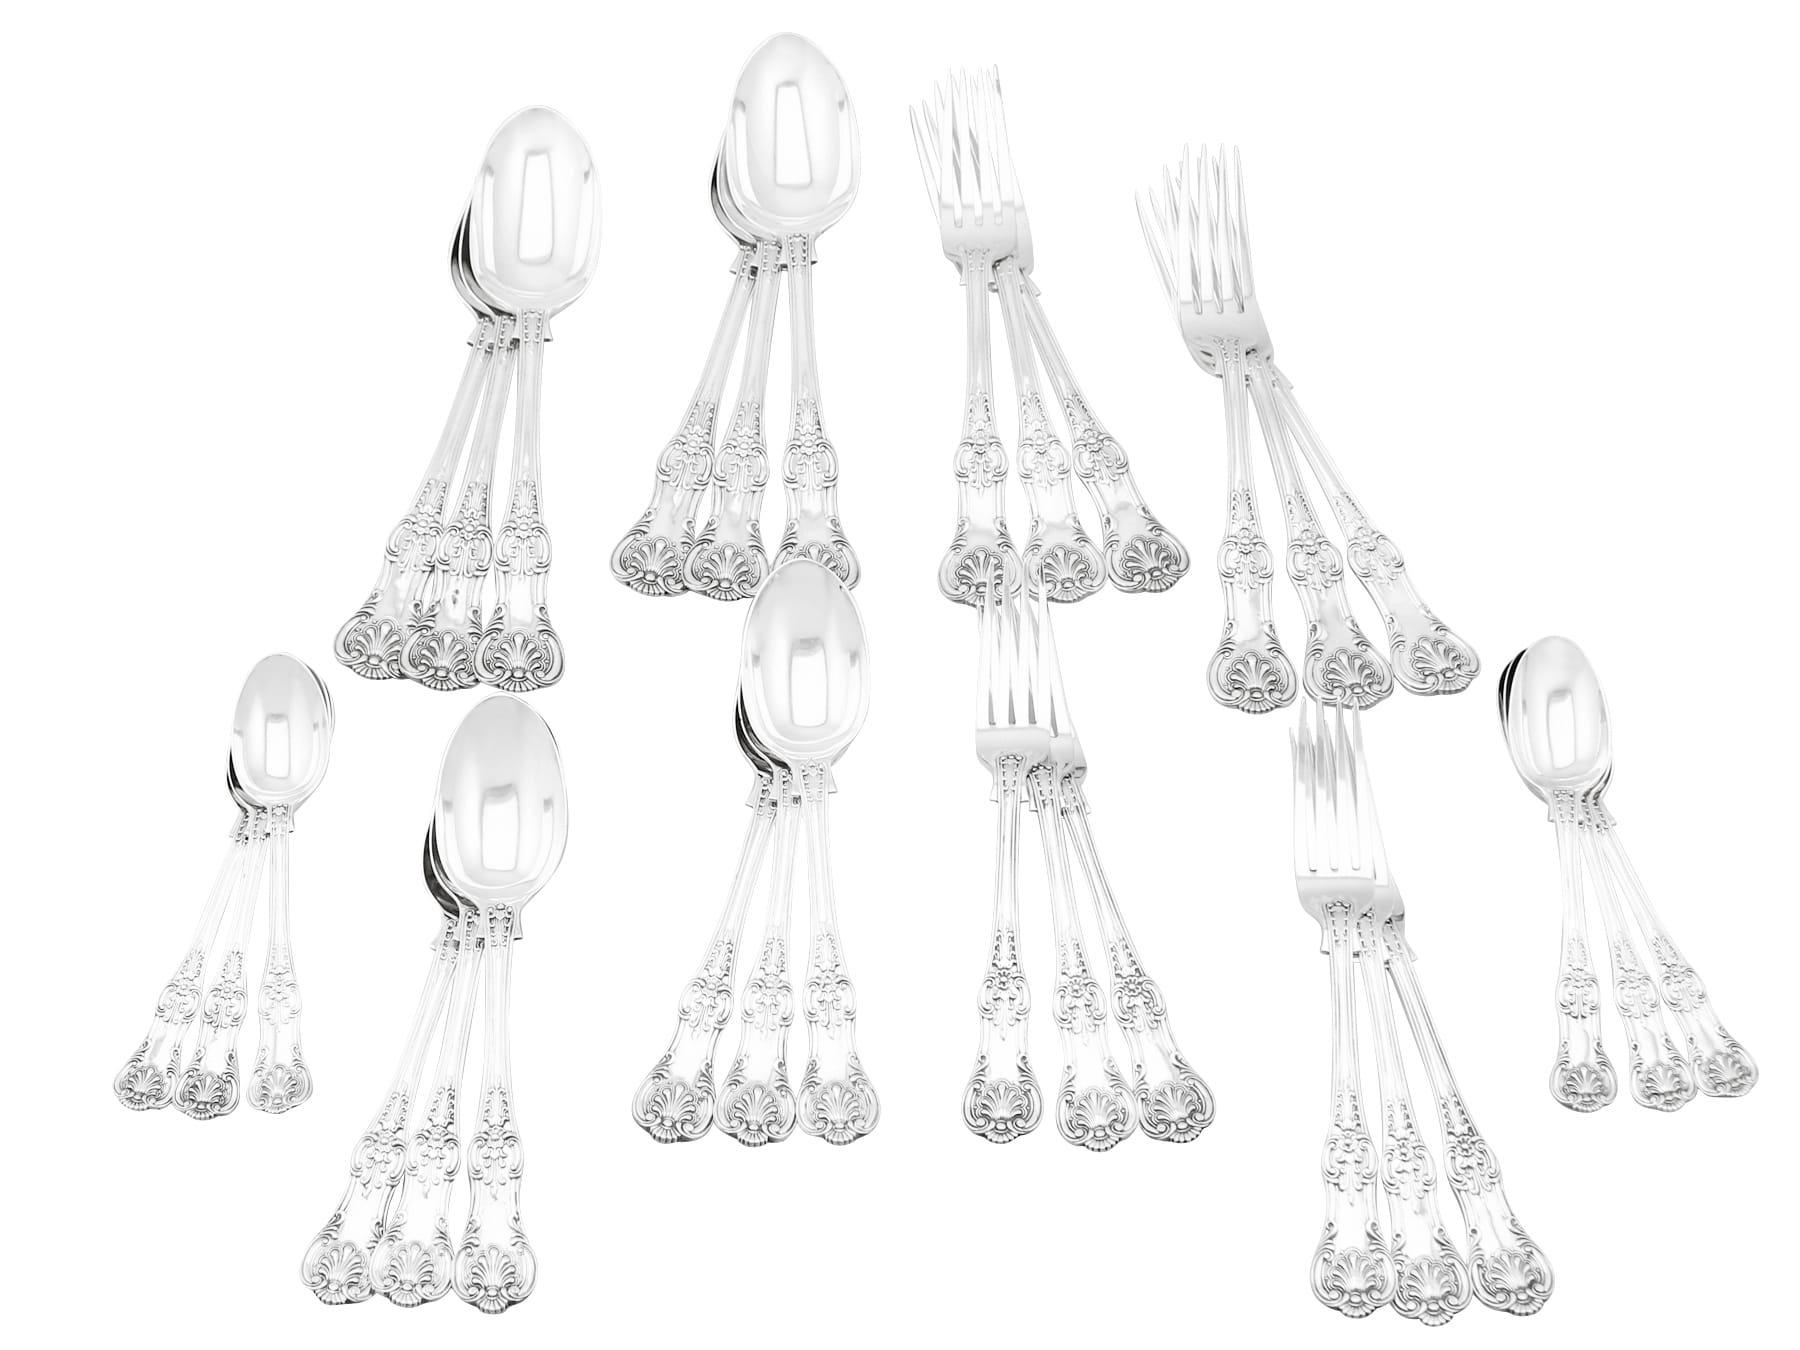 An exceptional, fine and impressive antique Victorian English sterling silver straight Queen's pattern flatware service for six persons; an addition to our canteen of cutlery collection

The pieces of this exceptional, antique Victorian straight*,